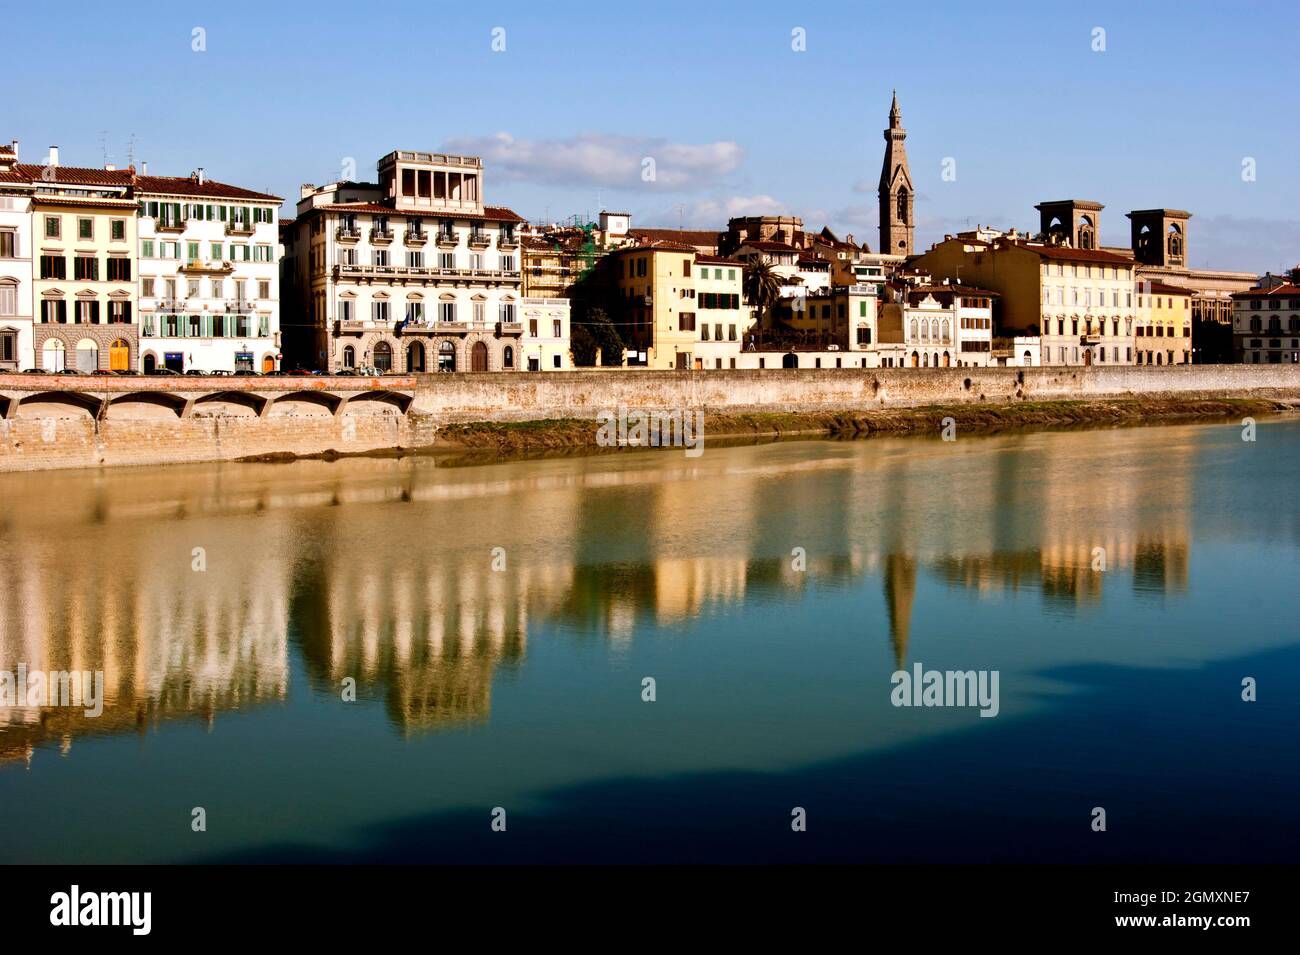 Reflections on the River Arno, Florence, Tuscany, Italy, Europe Stock Photo